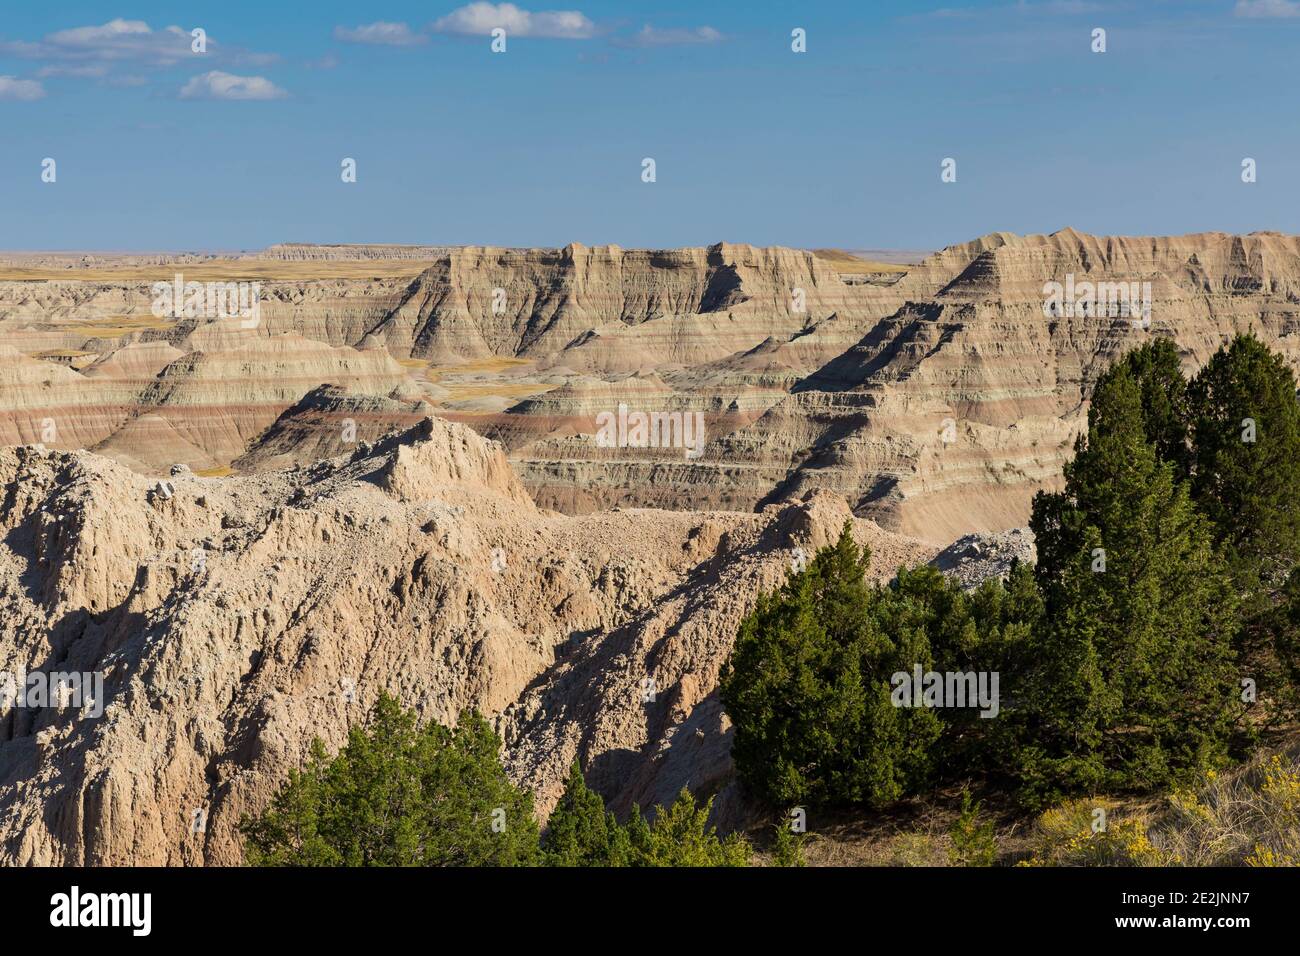 Badlands National Park in South Dakota is considered home to one of the world's richest deposits of mammal fossil beds as well as striking scenery. Stock Photo